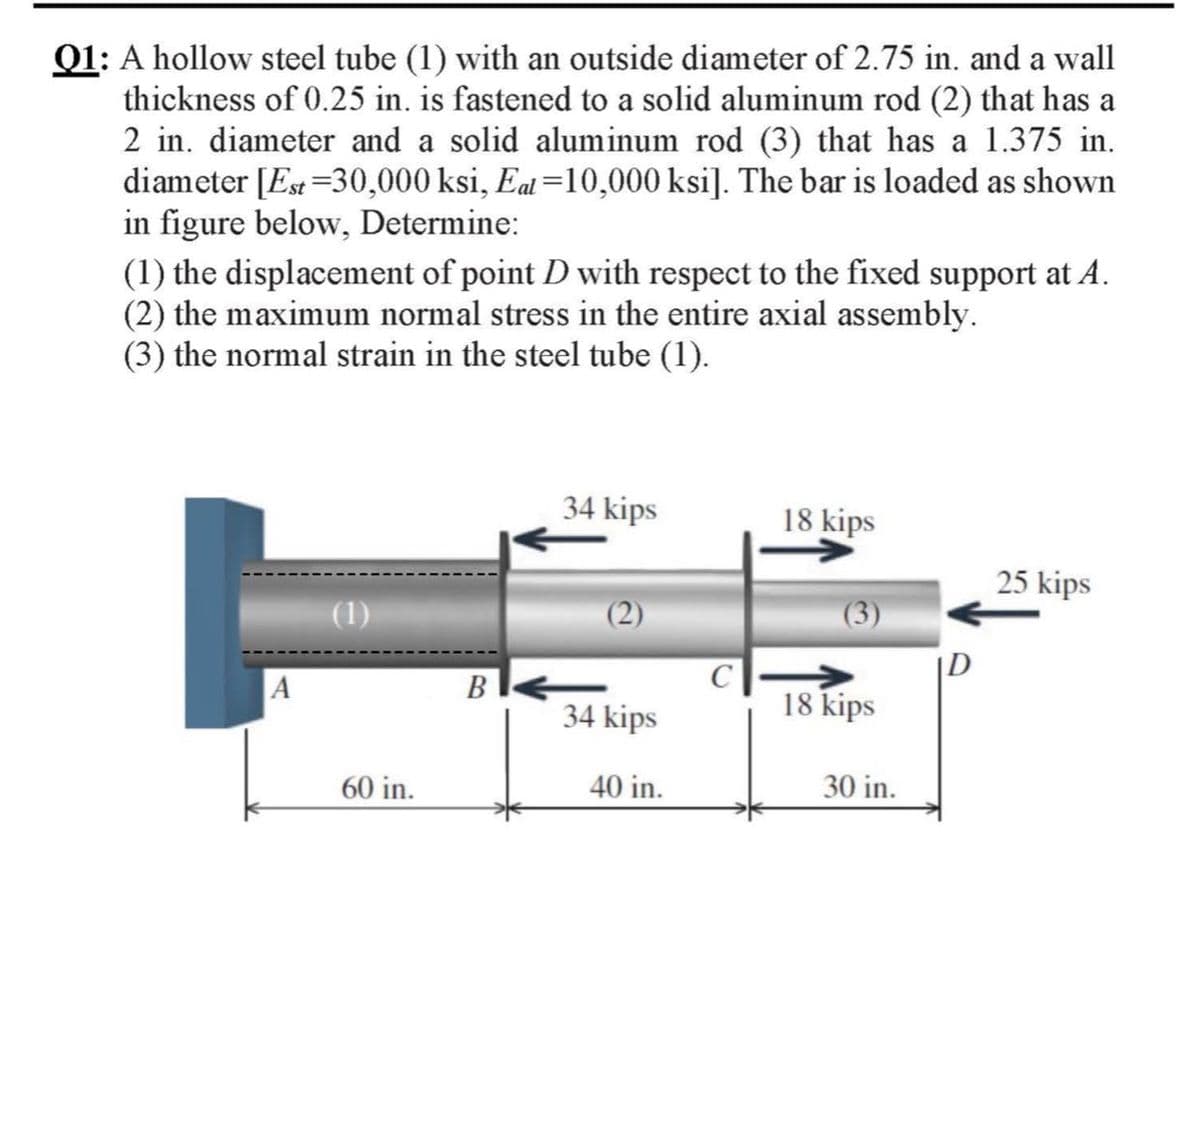 01: A hollow steel tube (1) with an outside diameter of 2.75 in. and a wall
thickness of 0.25 in. is fastened to a solid aluminum rod (2) that has a
2 in. diameter and a solid aluminum rod (3) that has a 1.375 in.
diameter [Est =30,000 ksi, Eal=10,000 ksi]. The bar is loaded as shown
in figure below, Determine:
(1) the displacement of point D with respect to the fixed support at A.
(2) the maximum normal stress in the entire axial assembly.
(3) the normal strain in the steel tube (1).
34 kips
18 kips
25 kips
(1)
|D
C
18 kips
B
34 kips
60 in.
40 in.
30 in.
